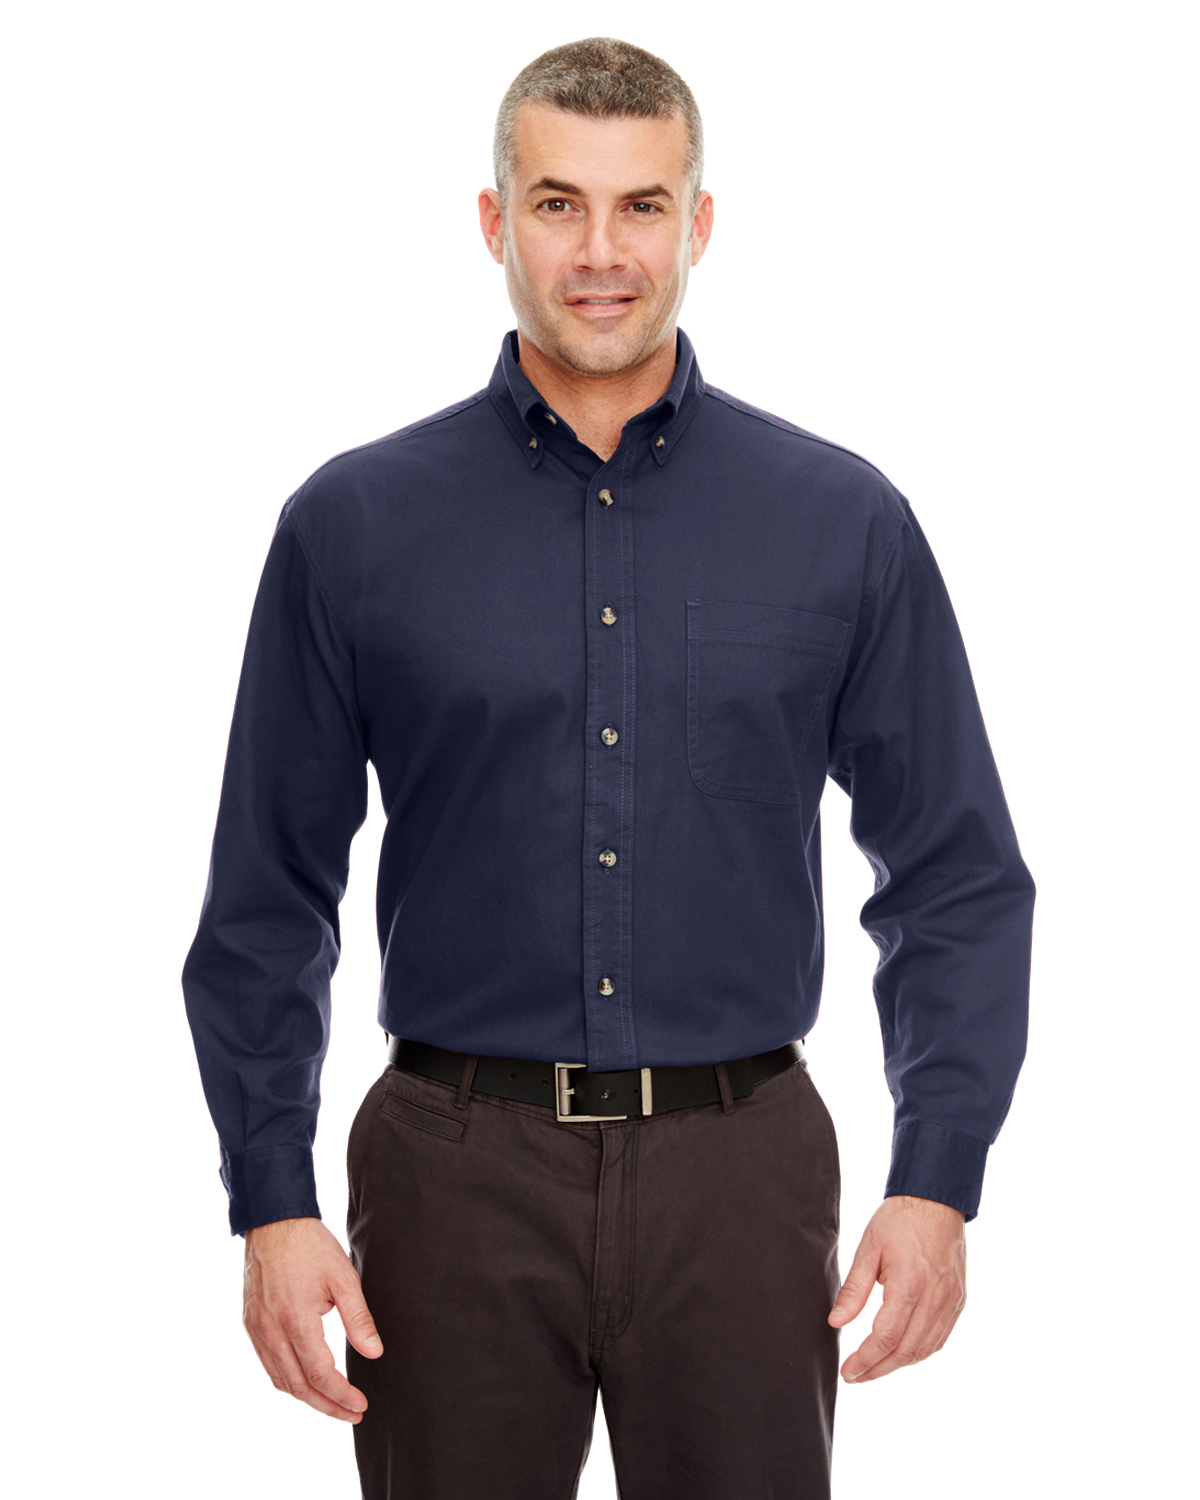 ULTRACLUB - 8960C Men's Cypress Colors Long-Sleeve Woven with Pocket